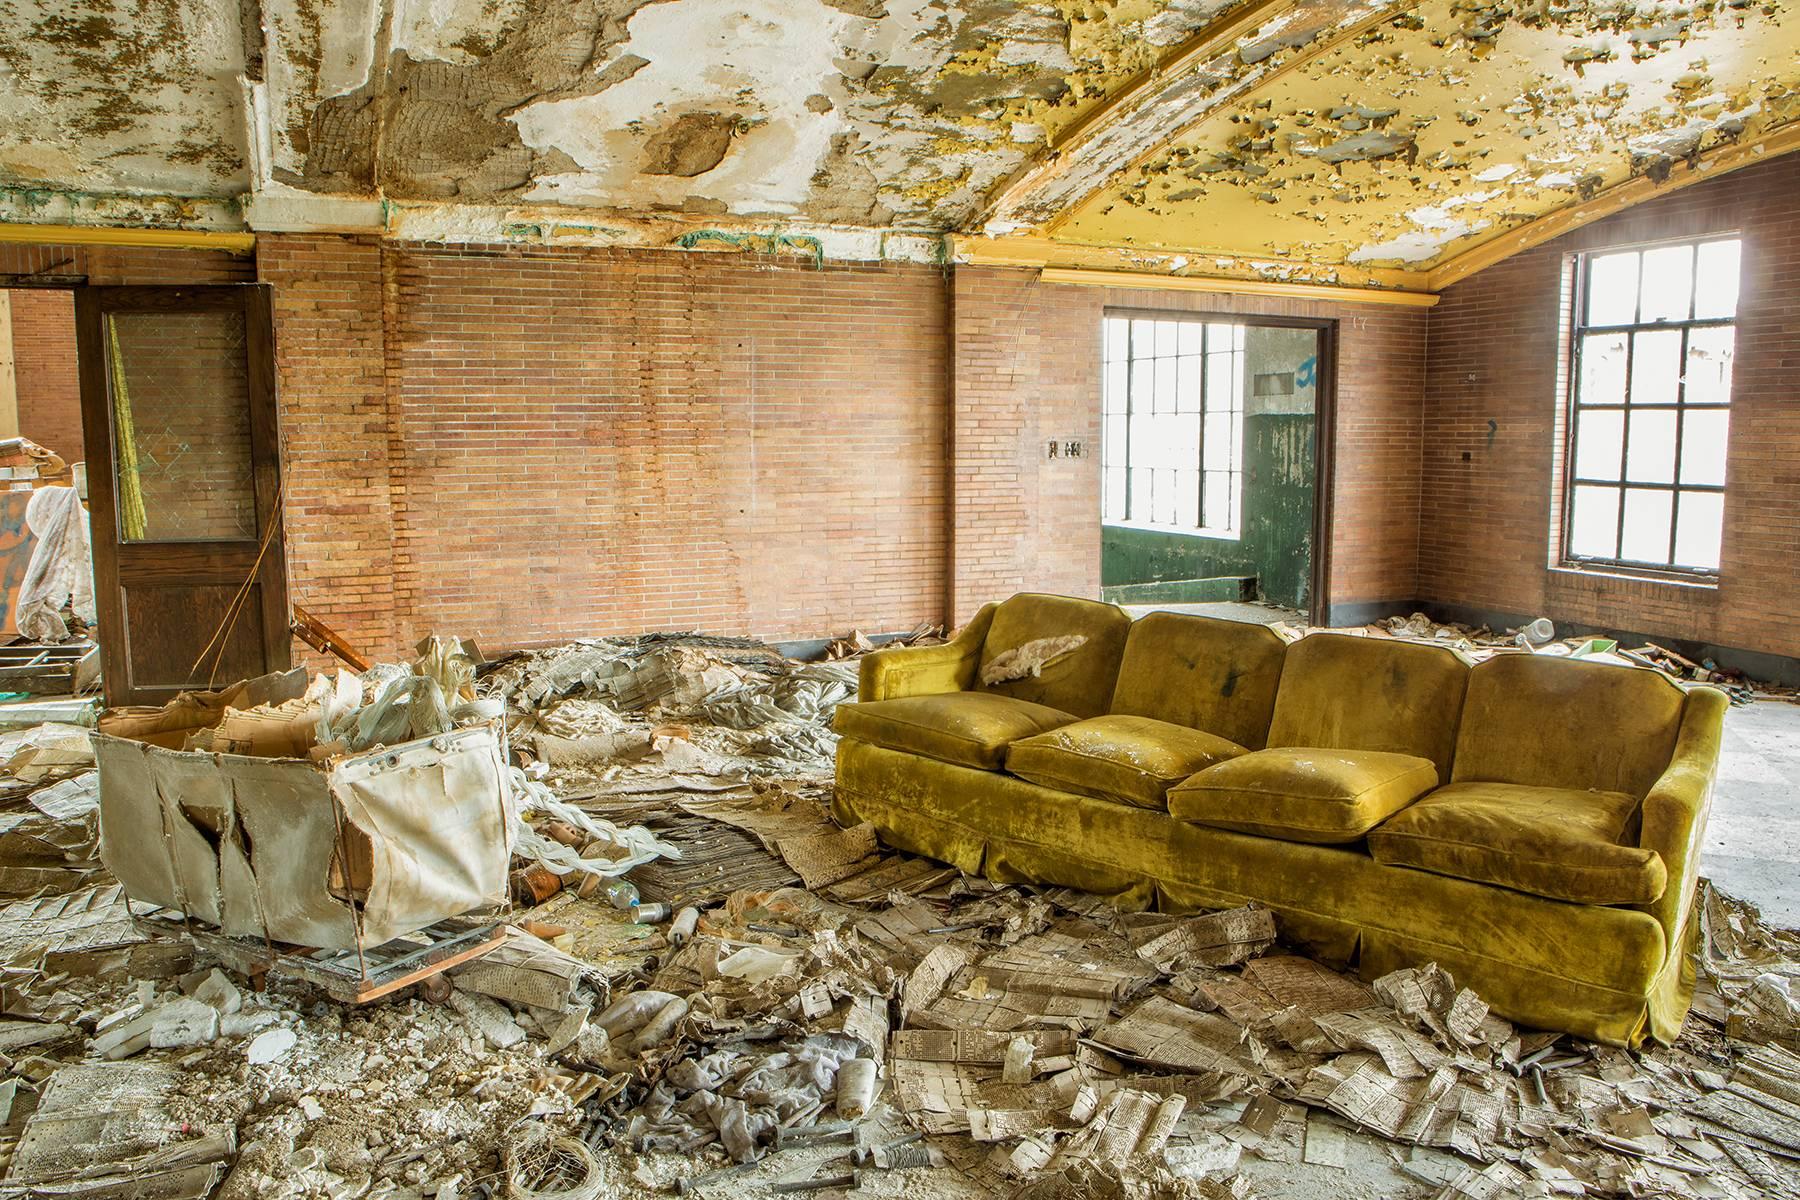 Rebecca Skinner Color Photograph - "Discarded", contemporary, industrial, couch, yellow, color photograph